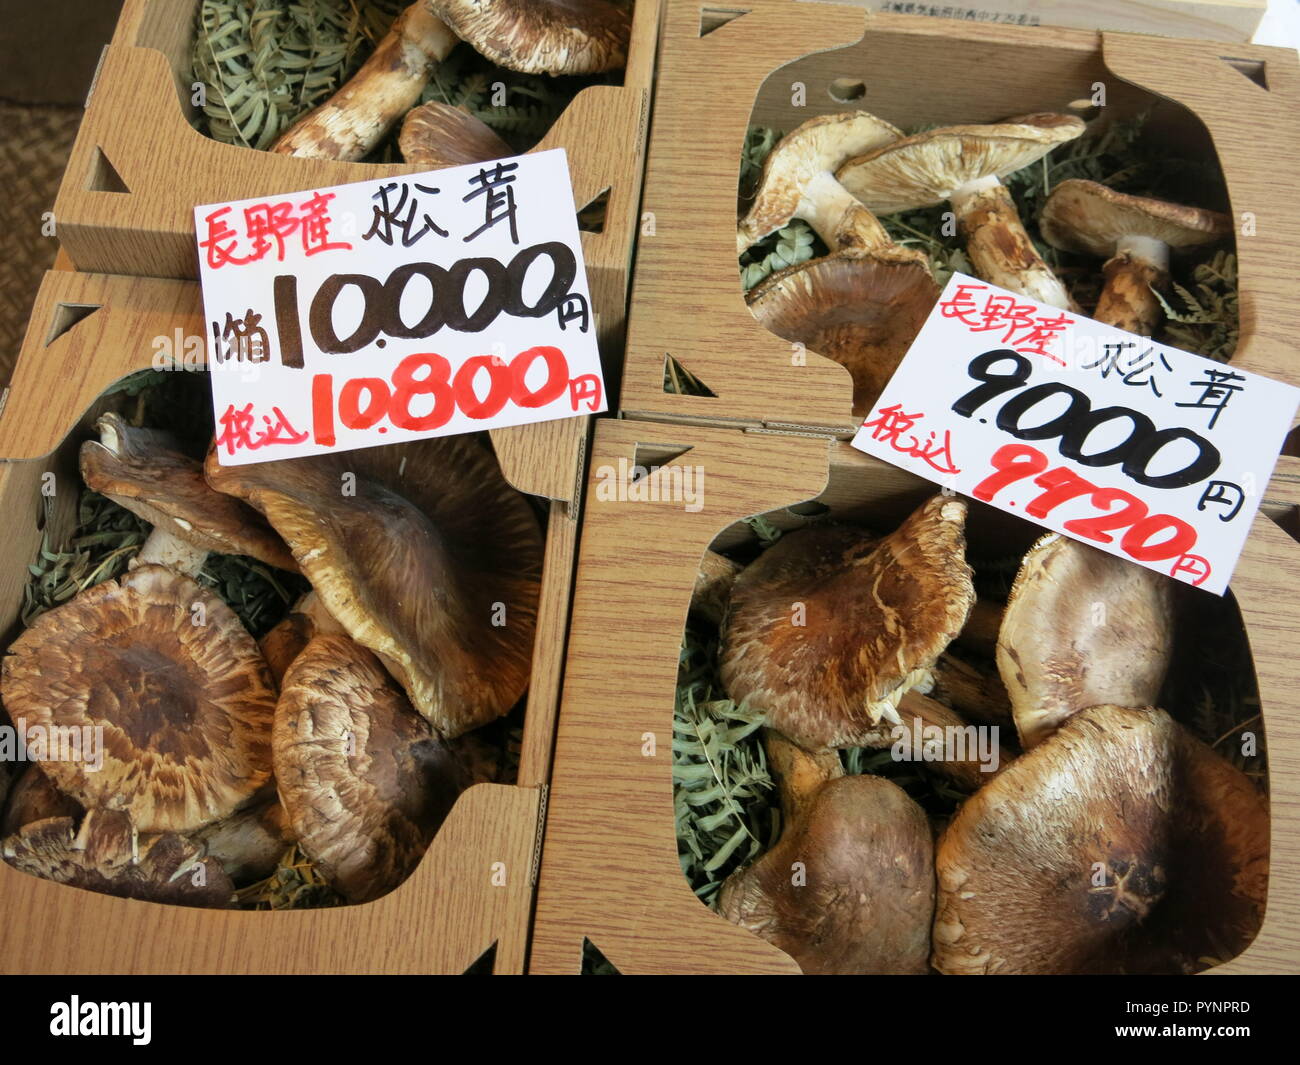 Mushrooms for sale at a Japanese street market in central Tokyo Stock Photo